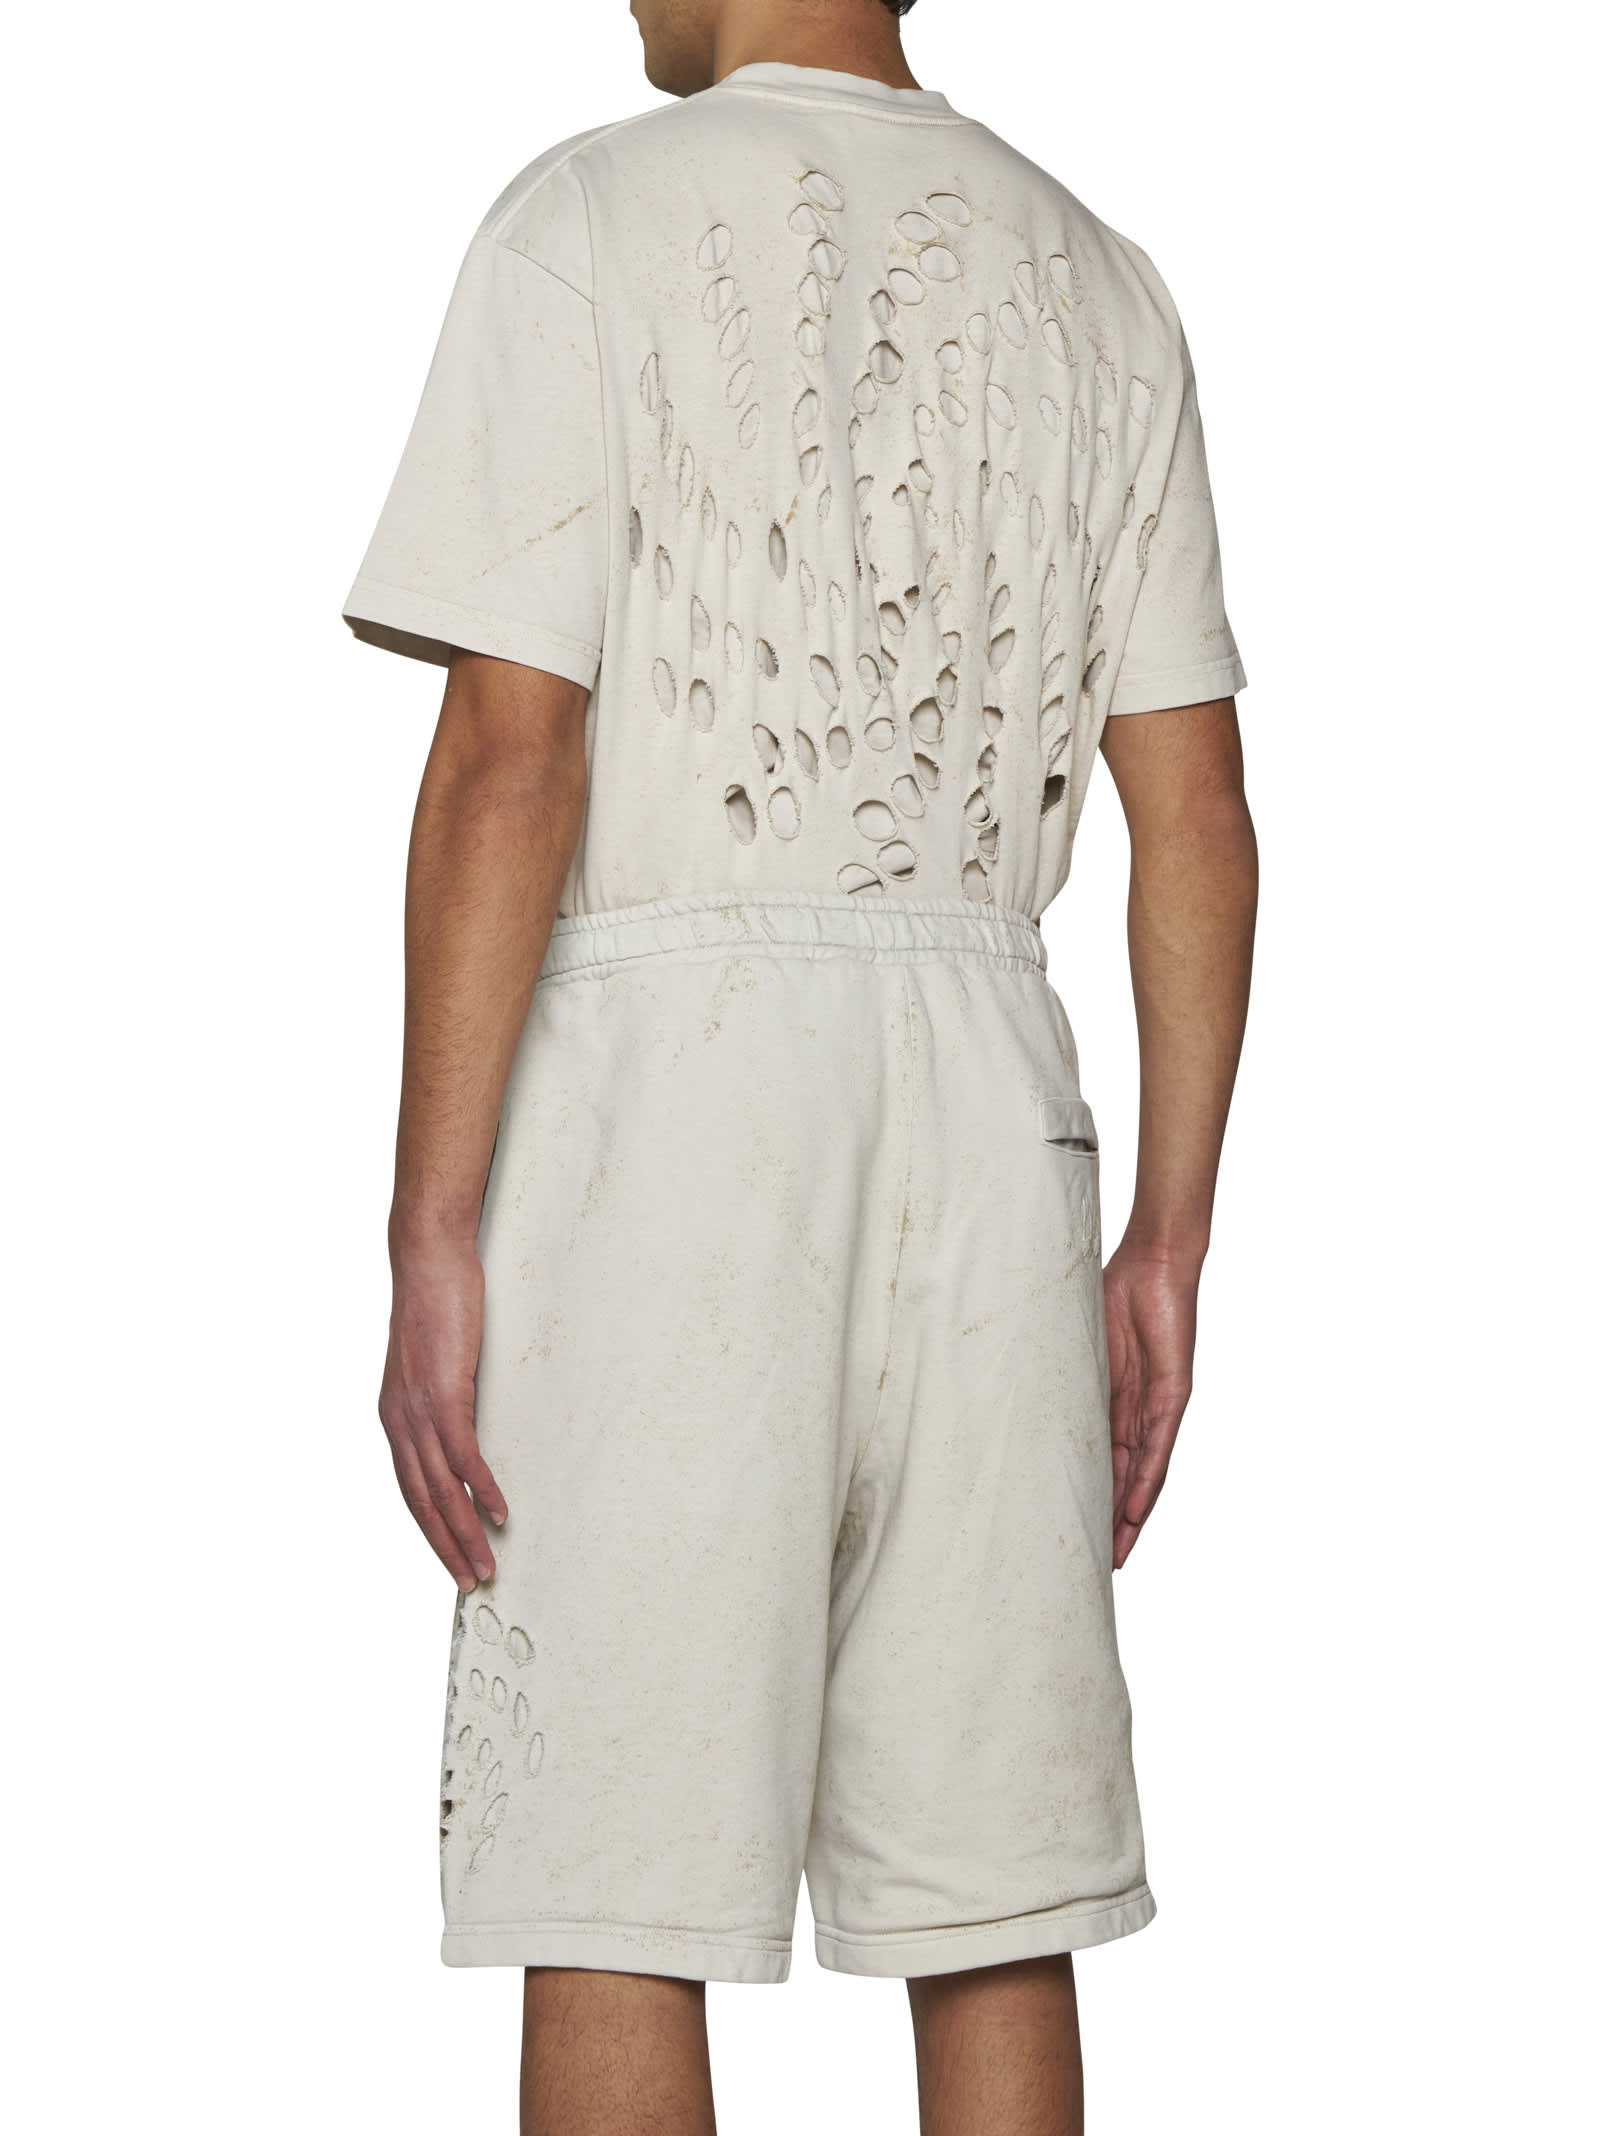 Shop 44 Label Group Shorts In Dirty White+gyps